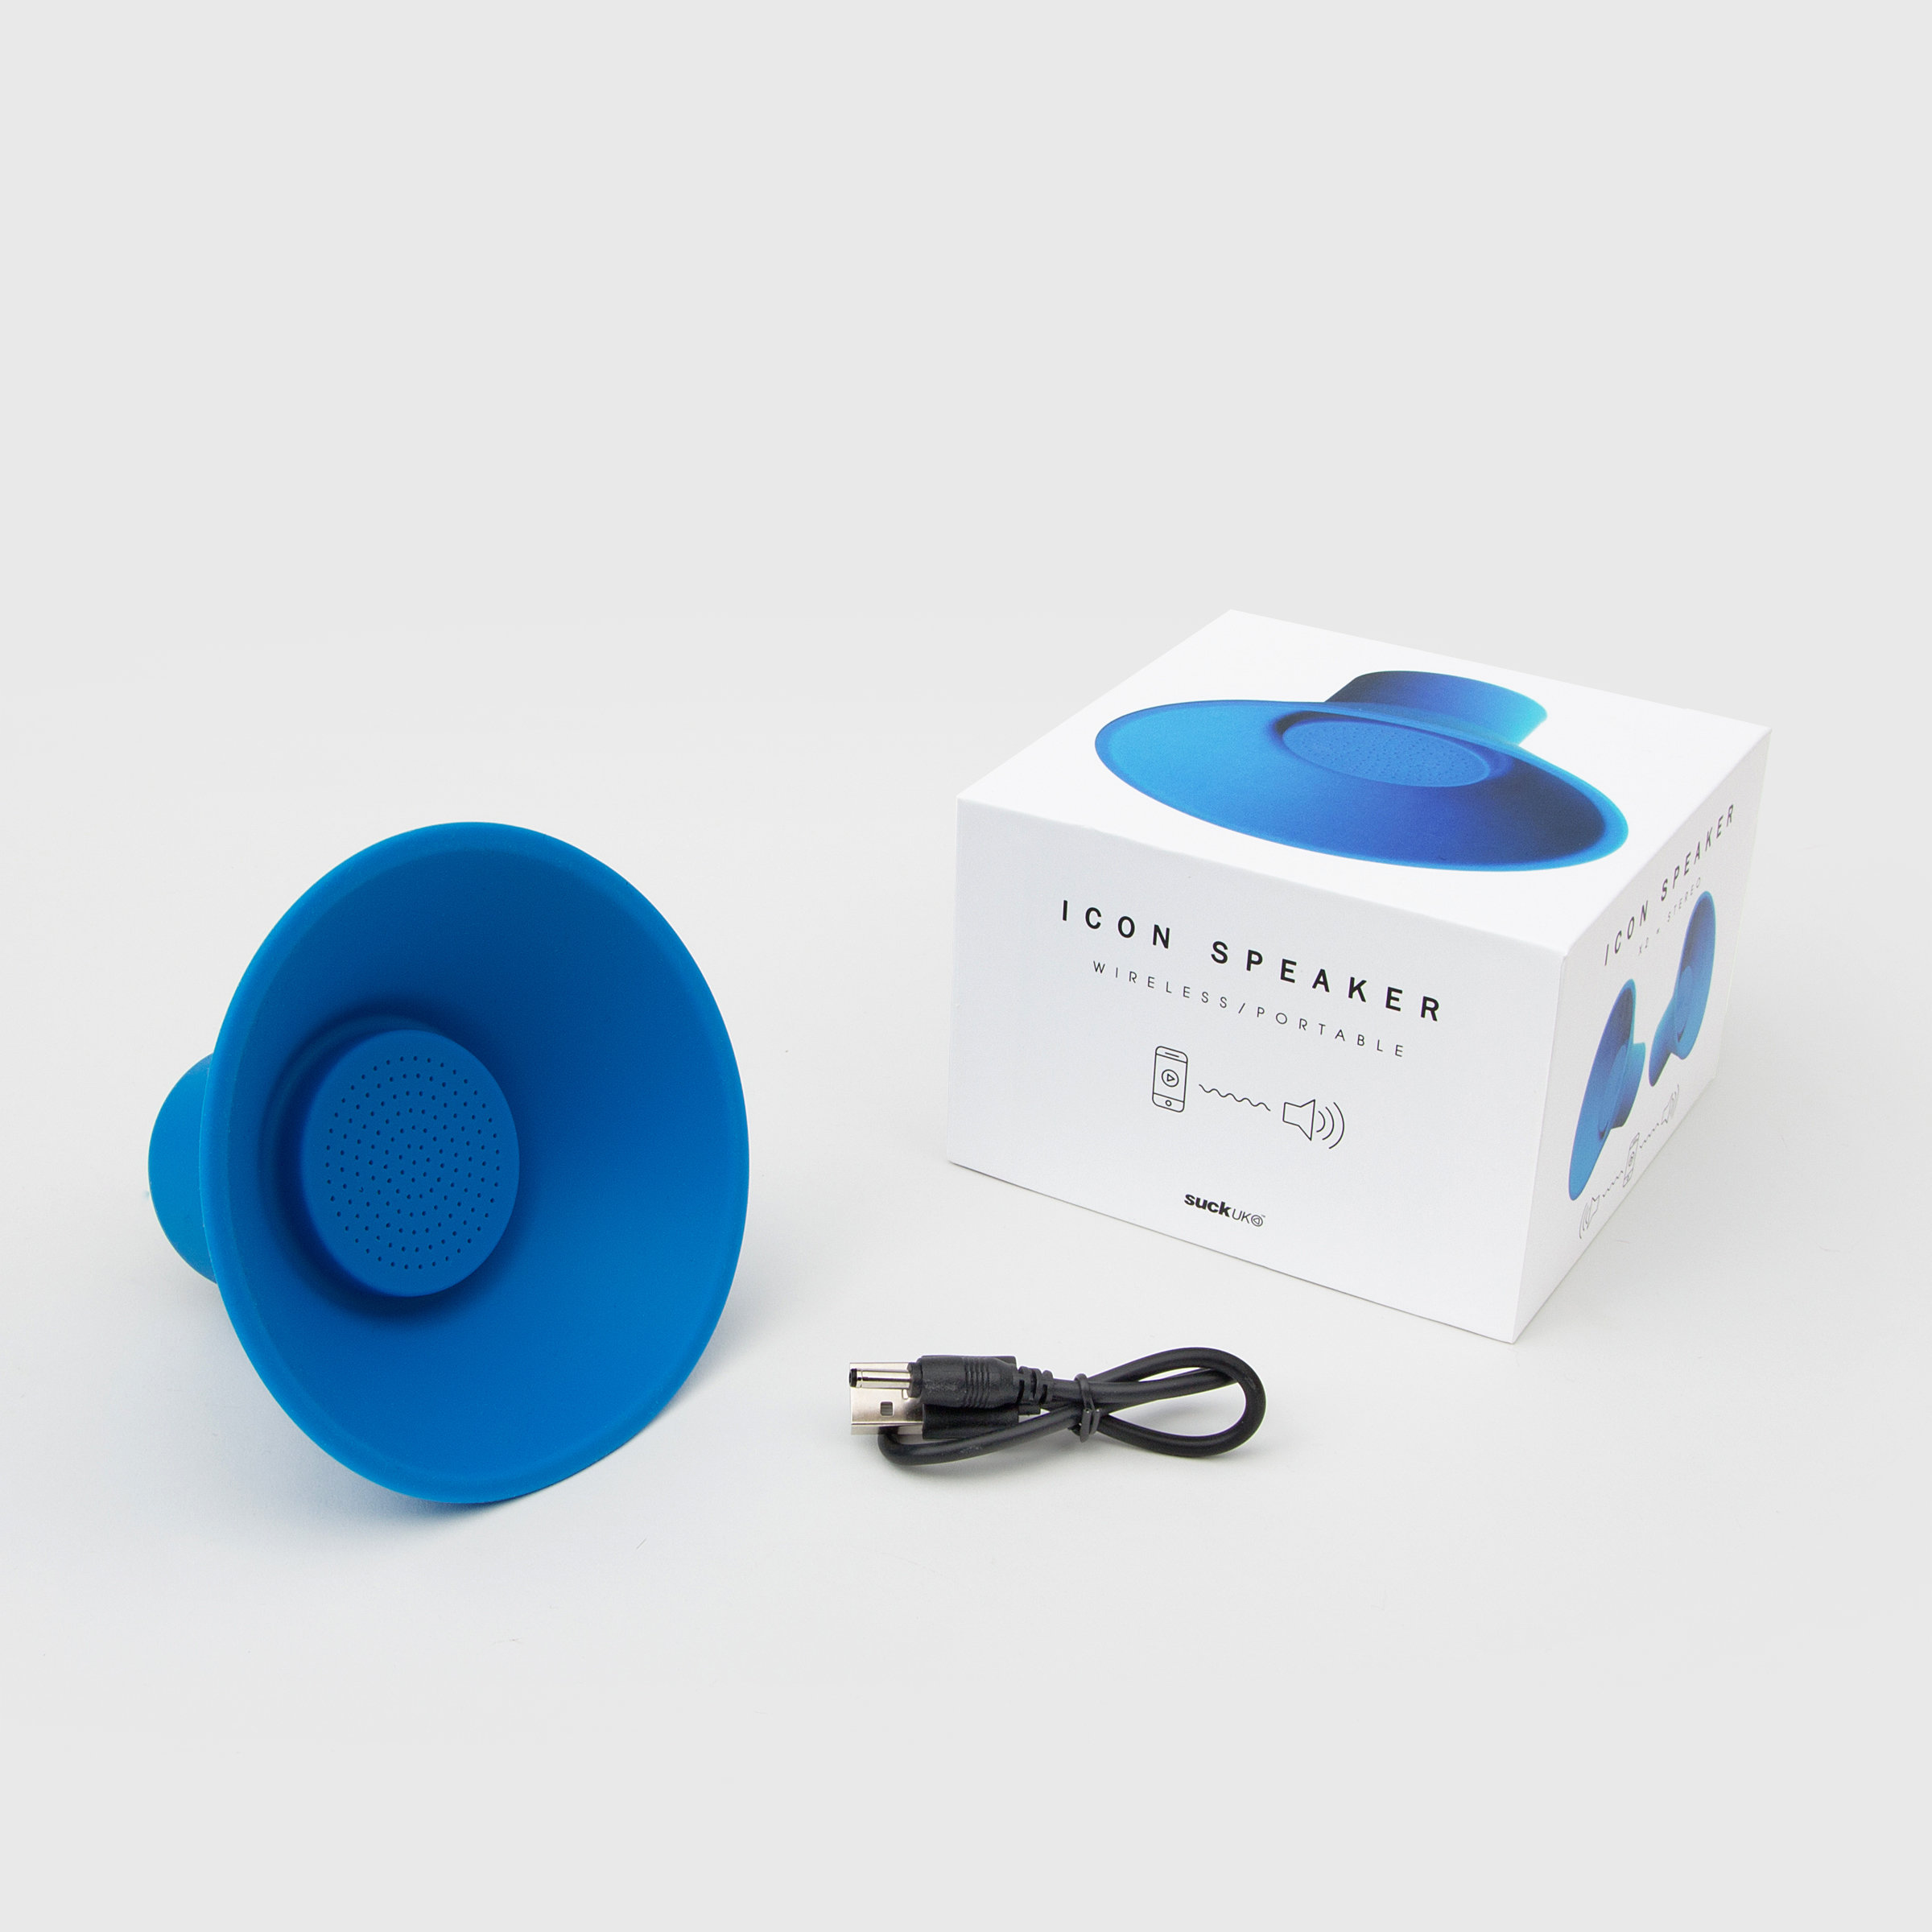 Bluetooth Speaker with Cable and Box